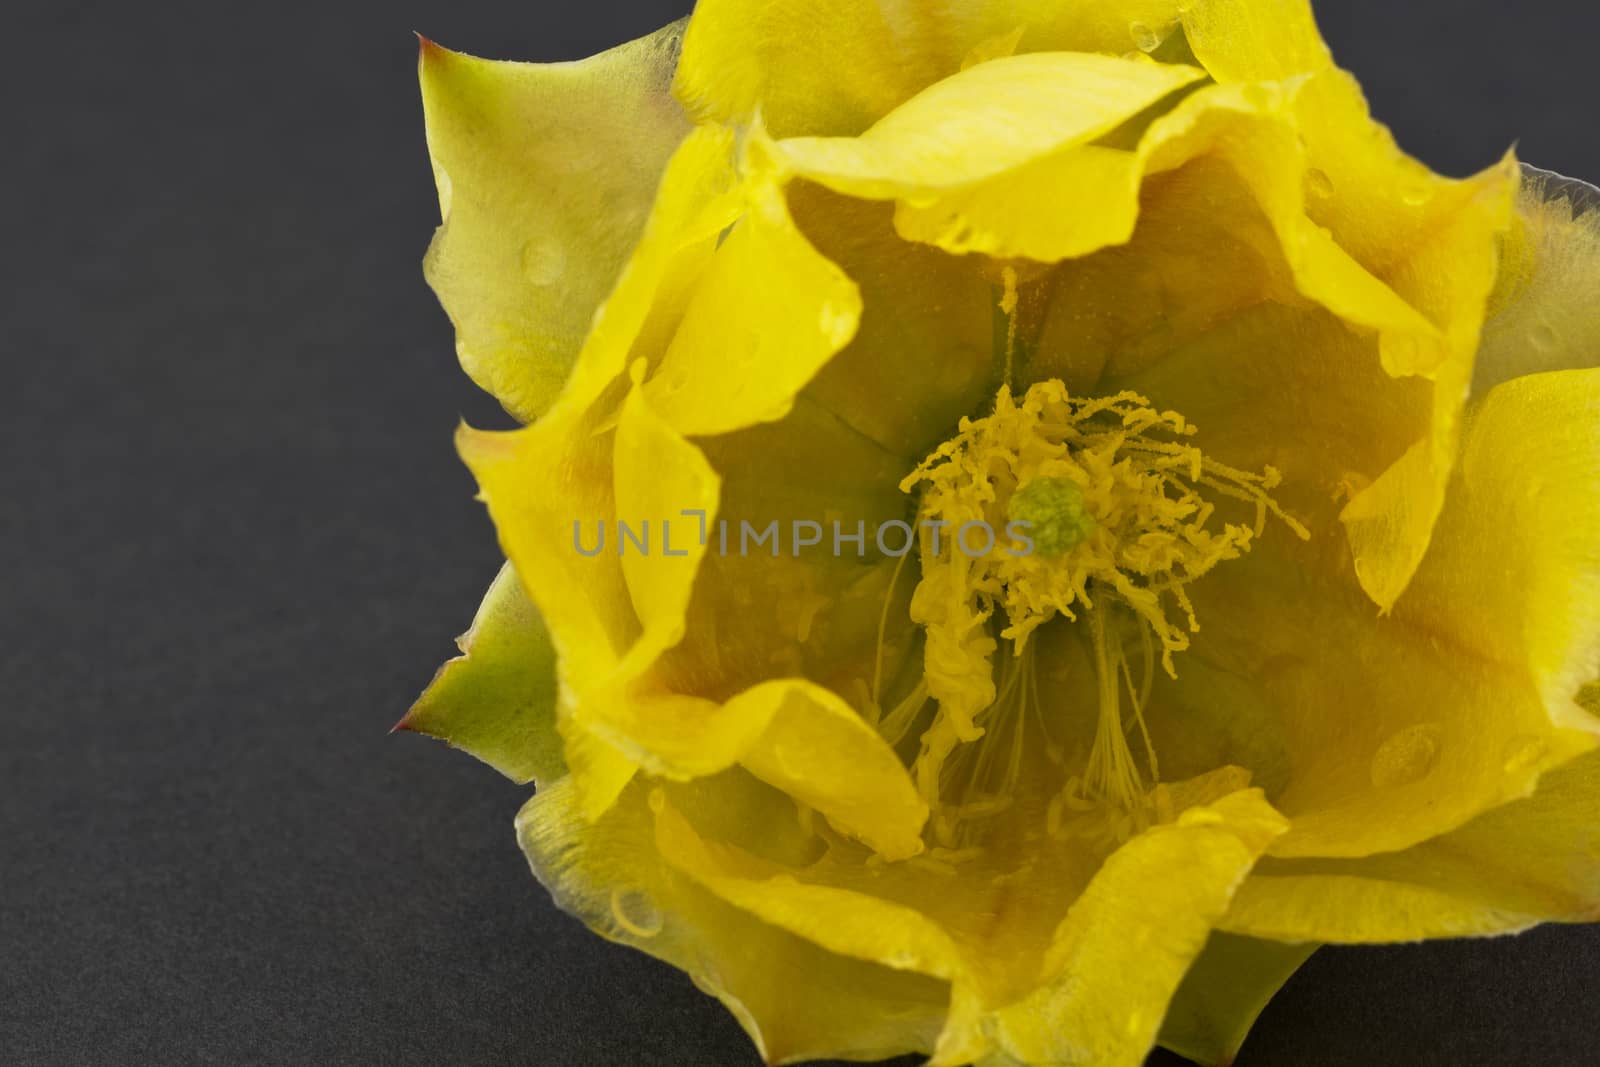 Stamen and pollen visible in macro photograph of yellow prickly pear cactus blossom placed on gray background.  Plant grows in Sonoran desert in Arizona, part of America's Southwest region. 